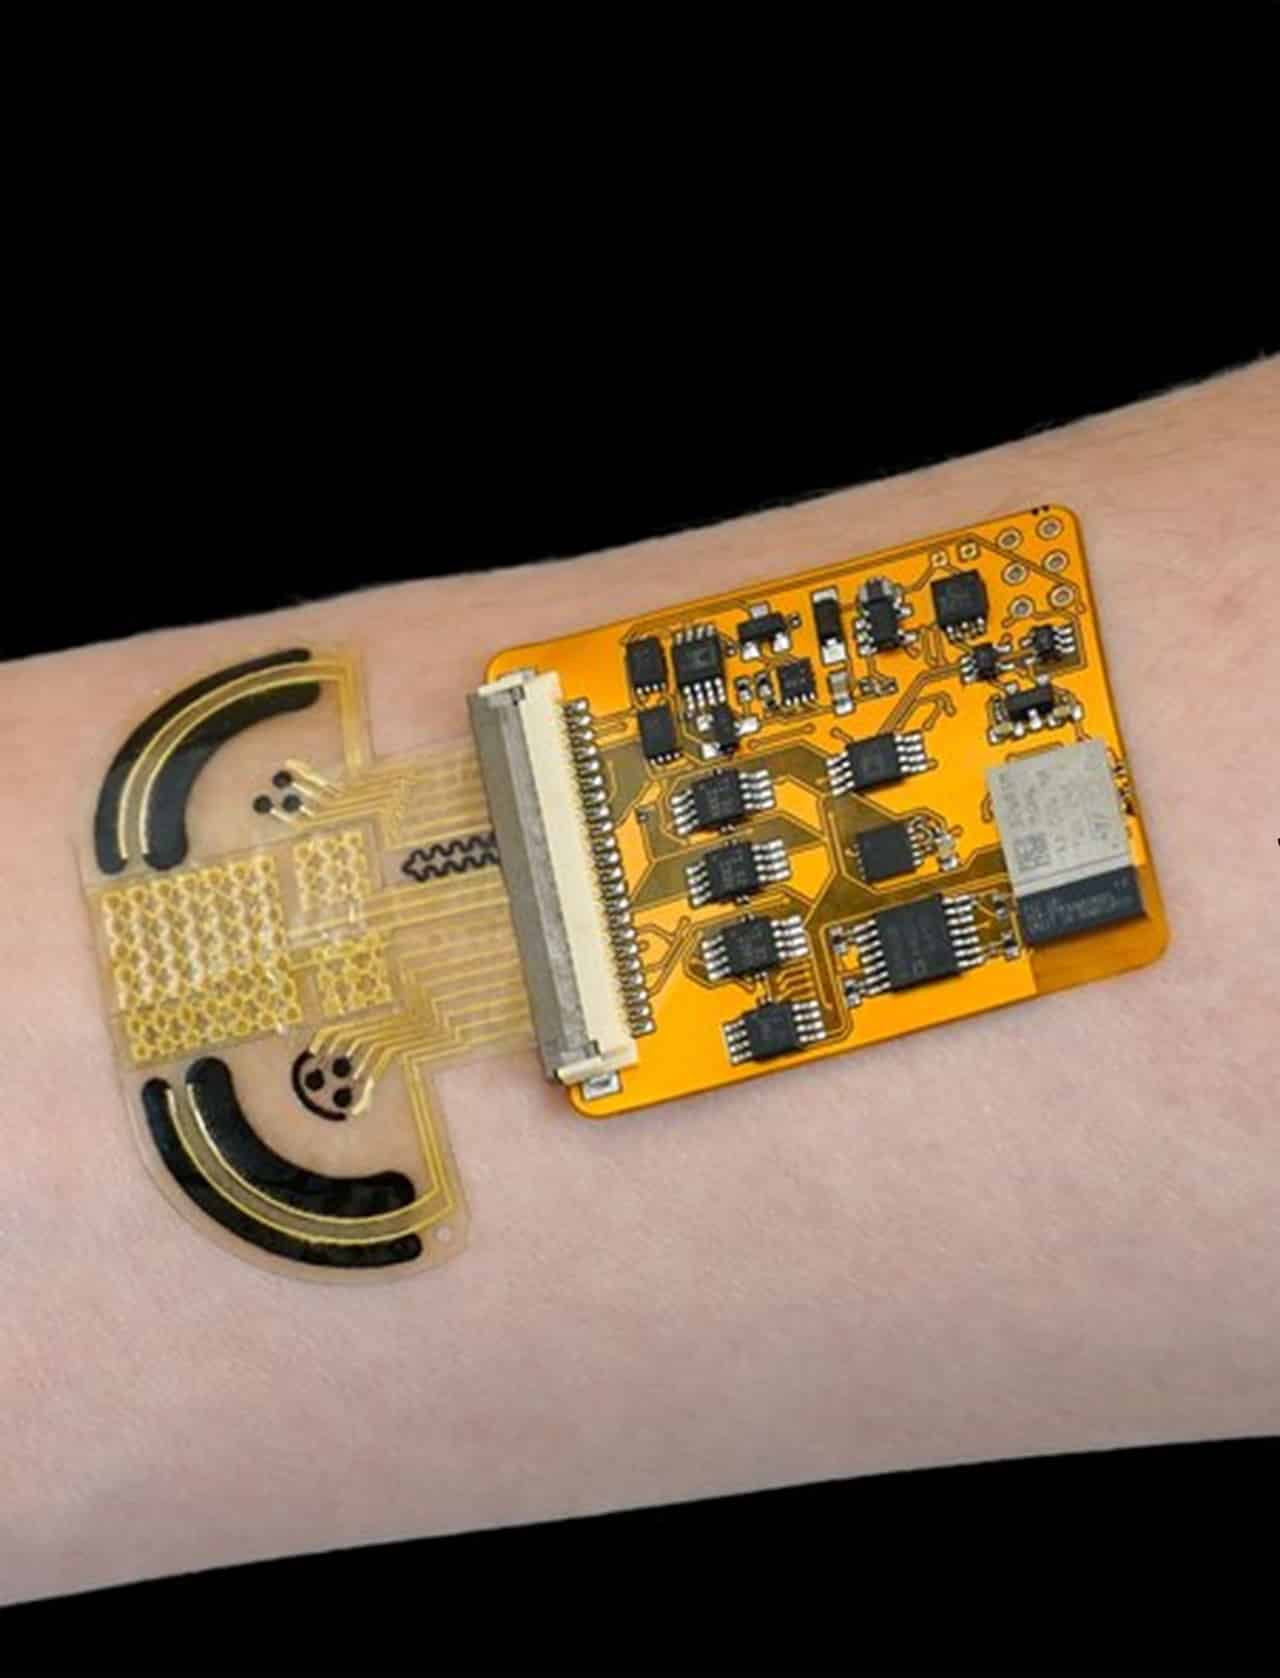 Electronic skin for monitoring stress responses